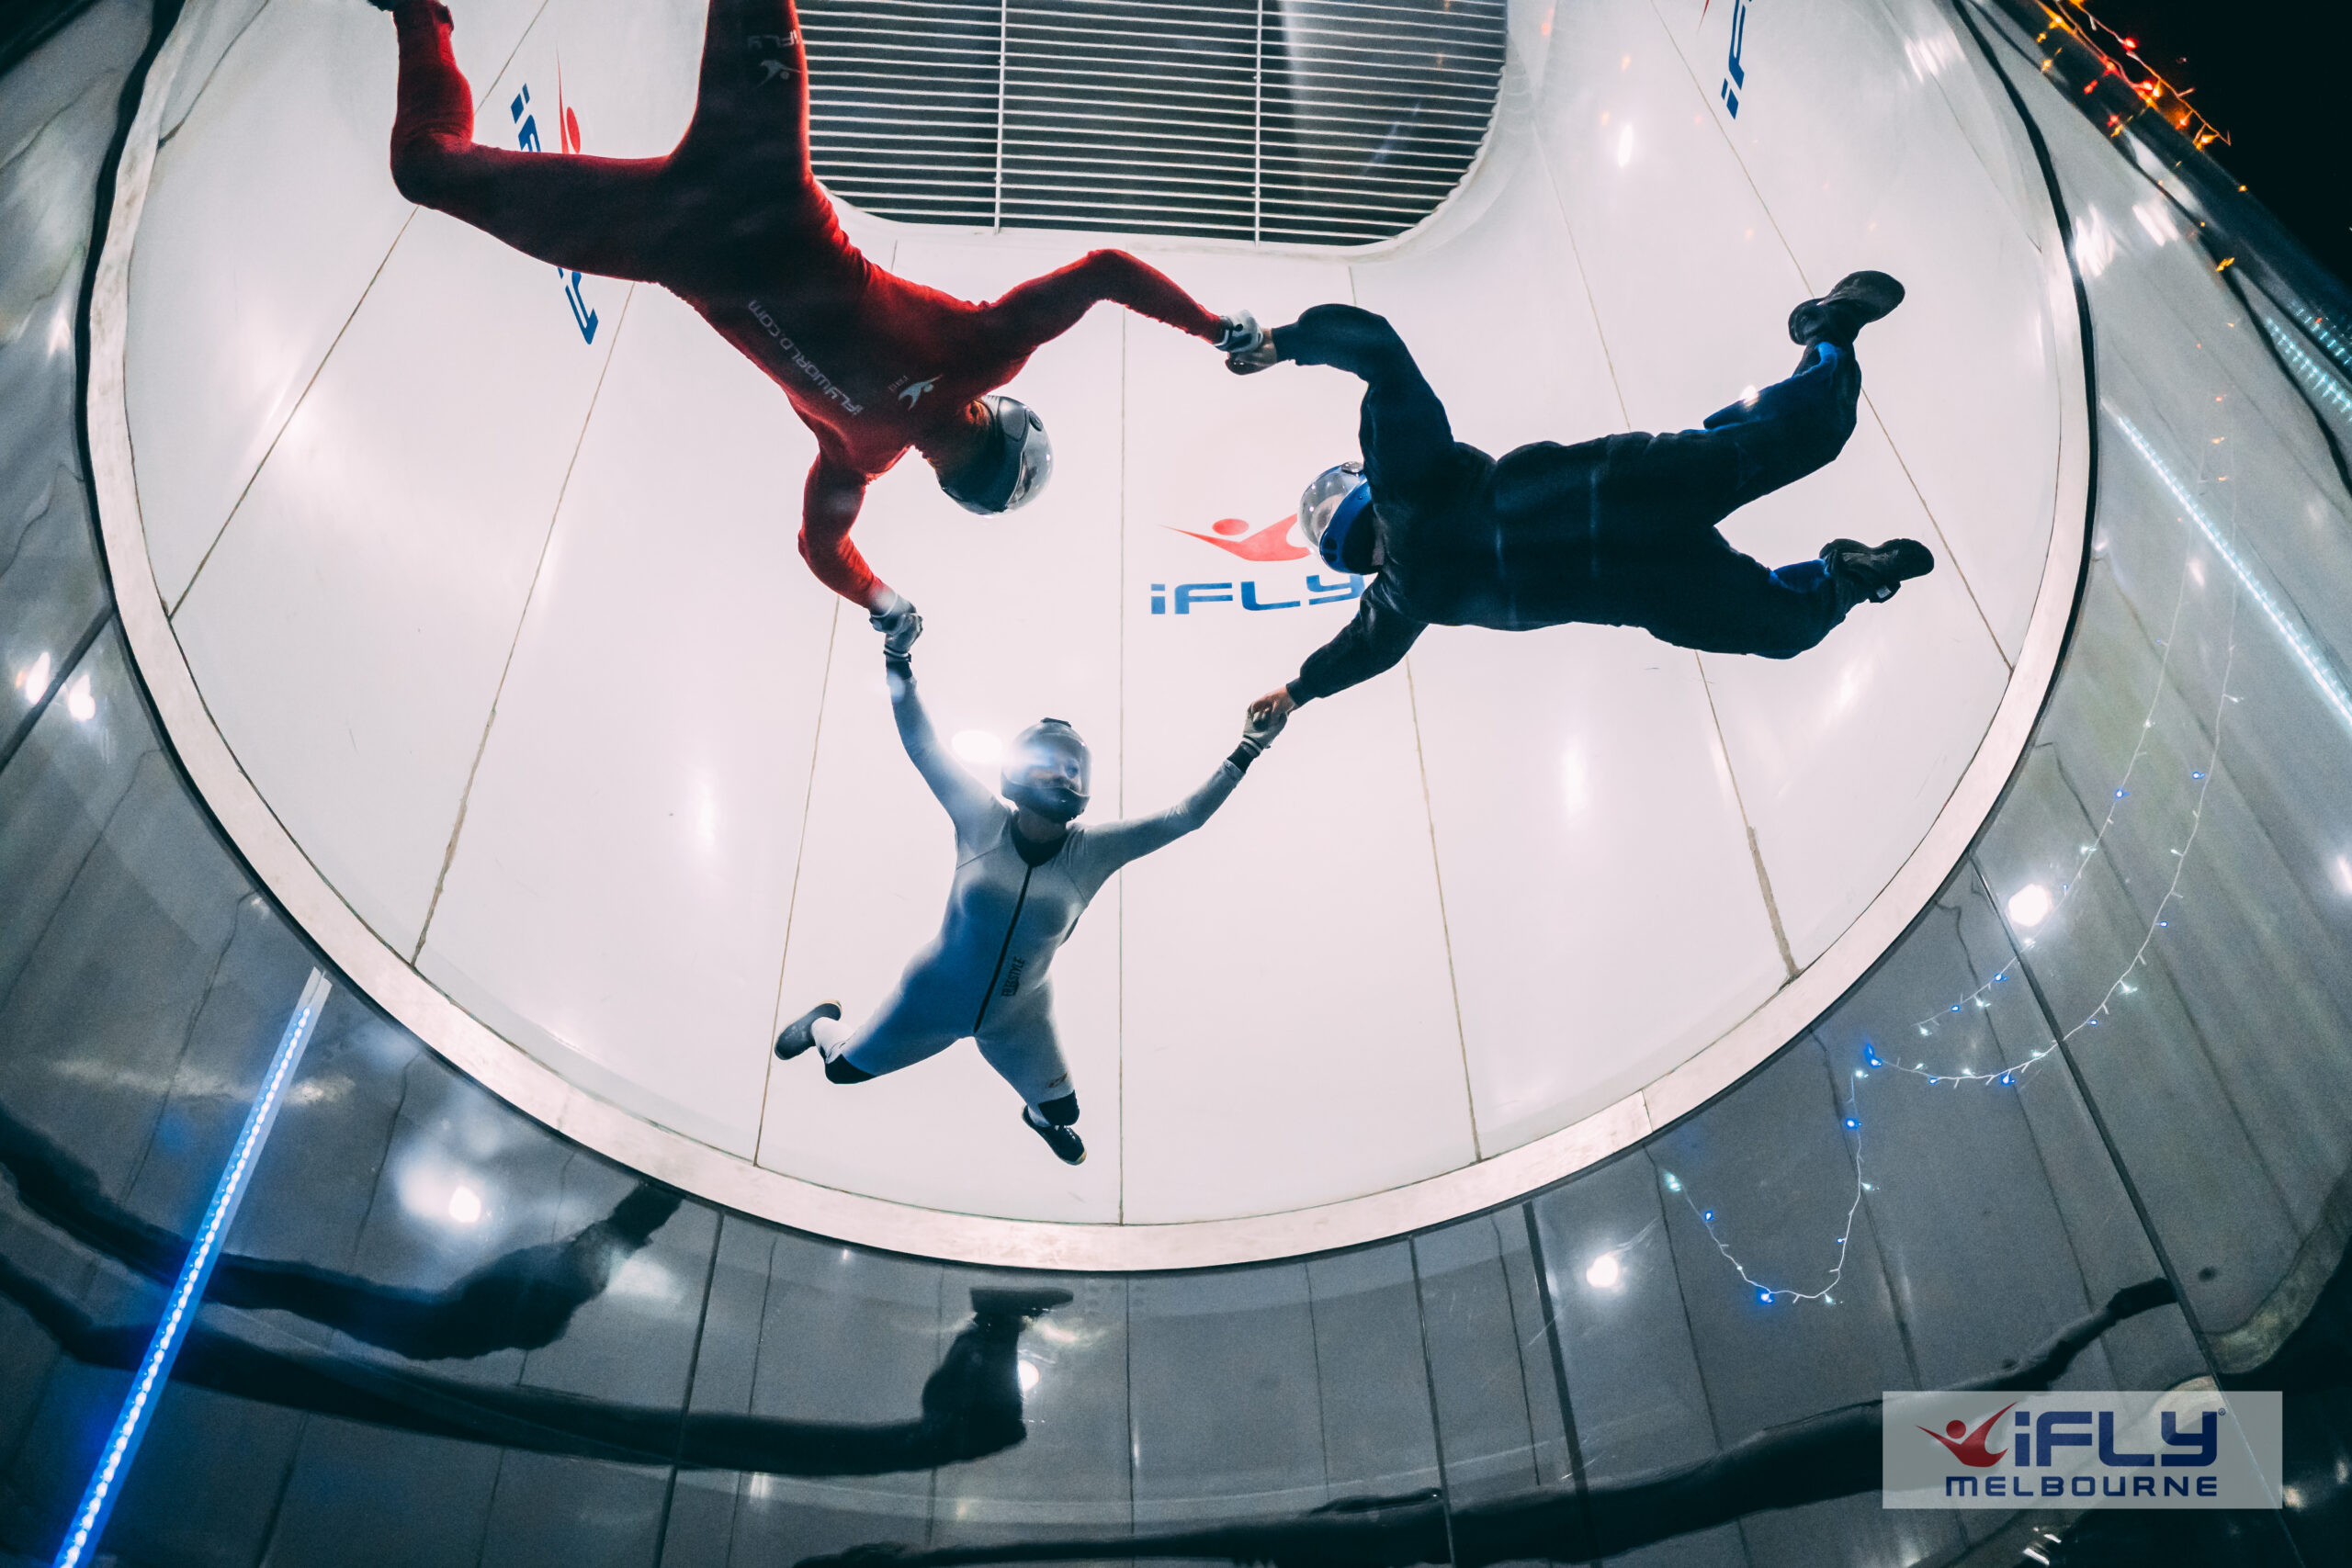 iFly Melbourne group flight